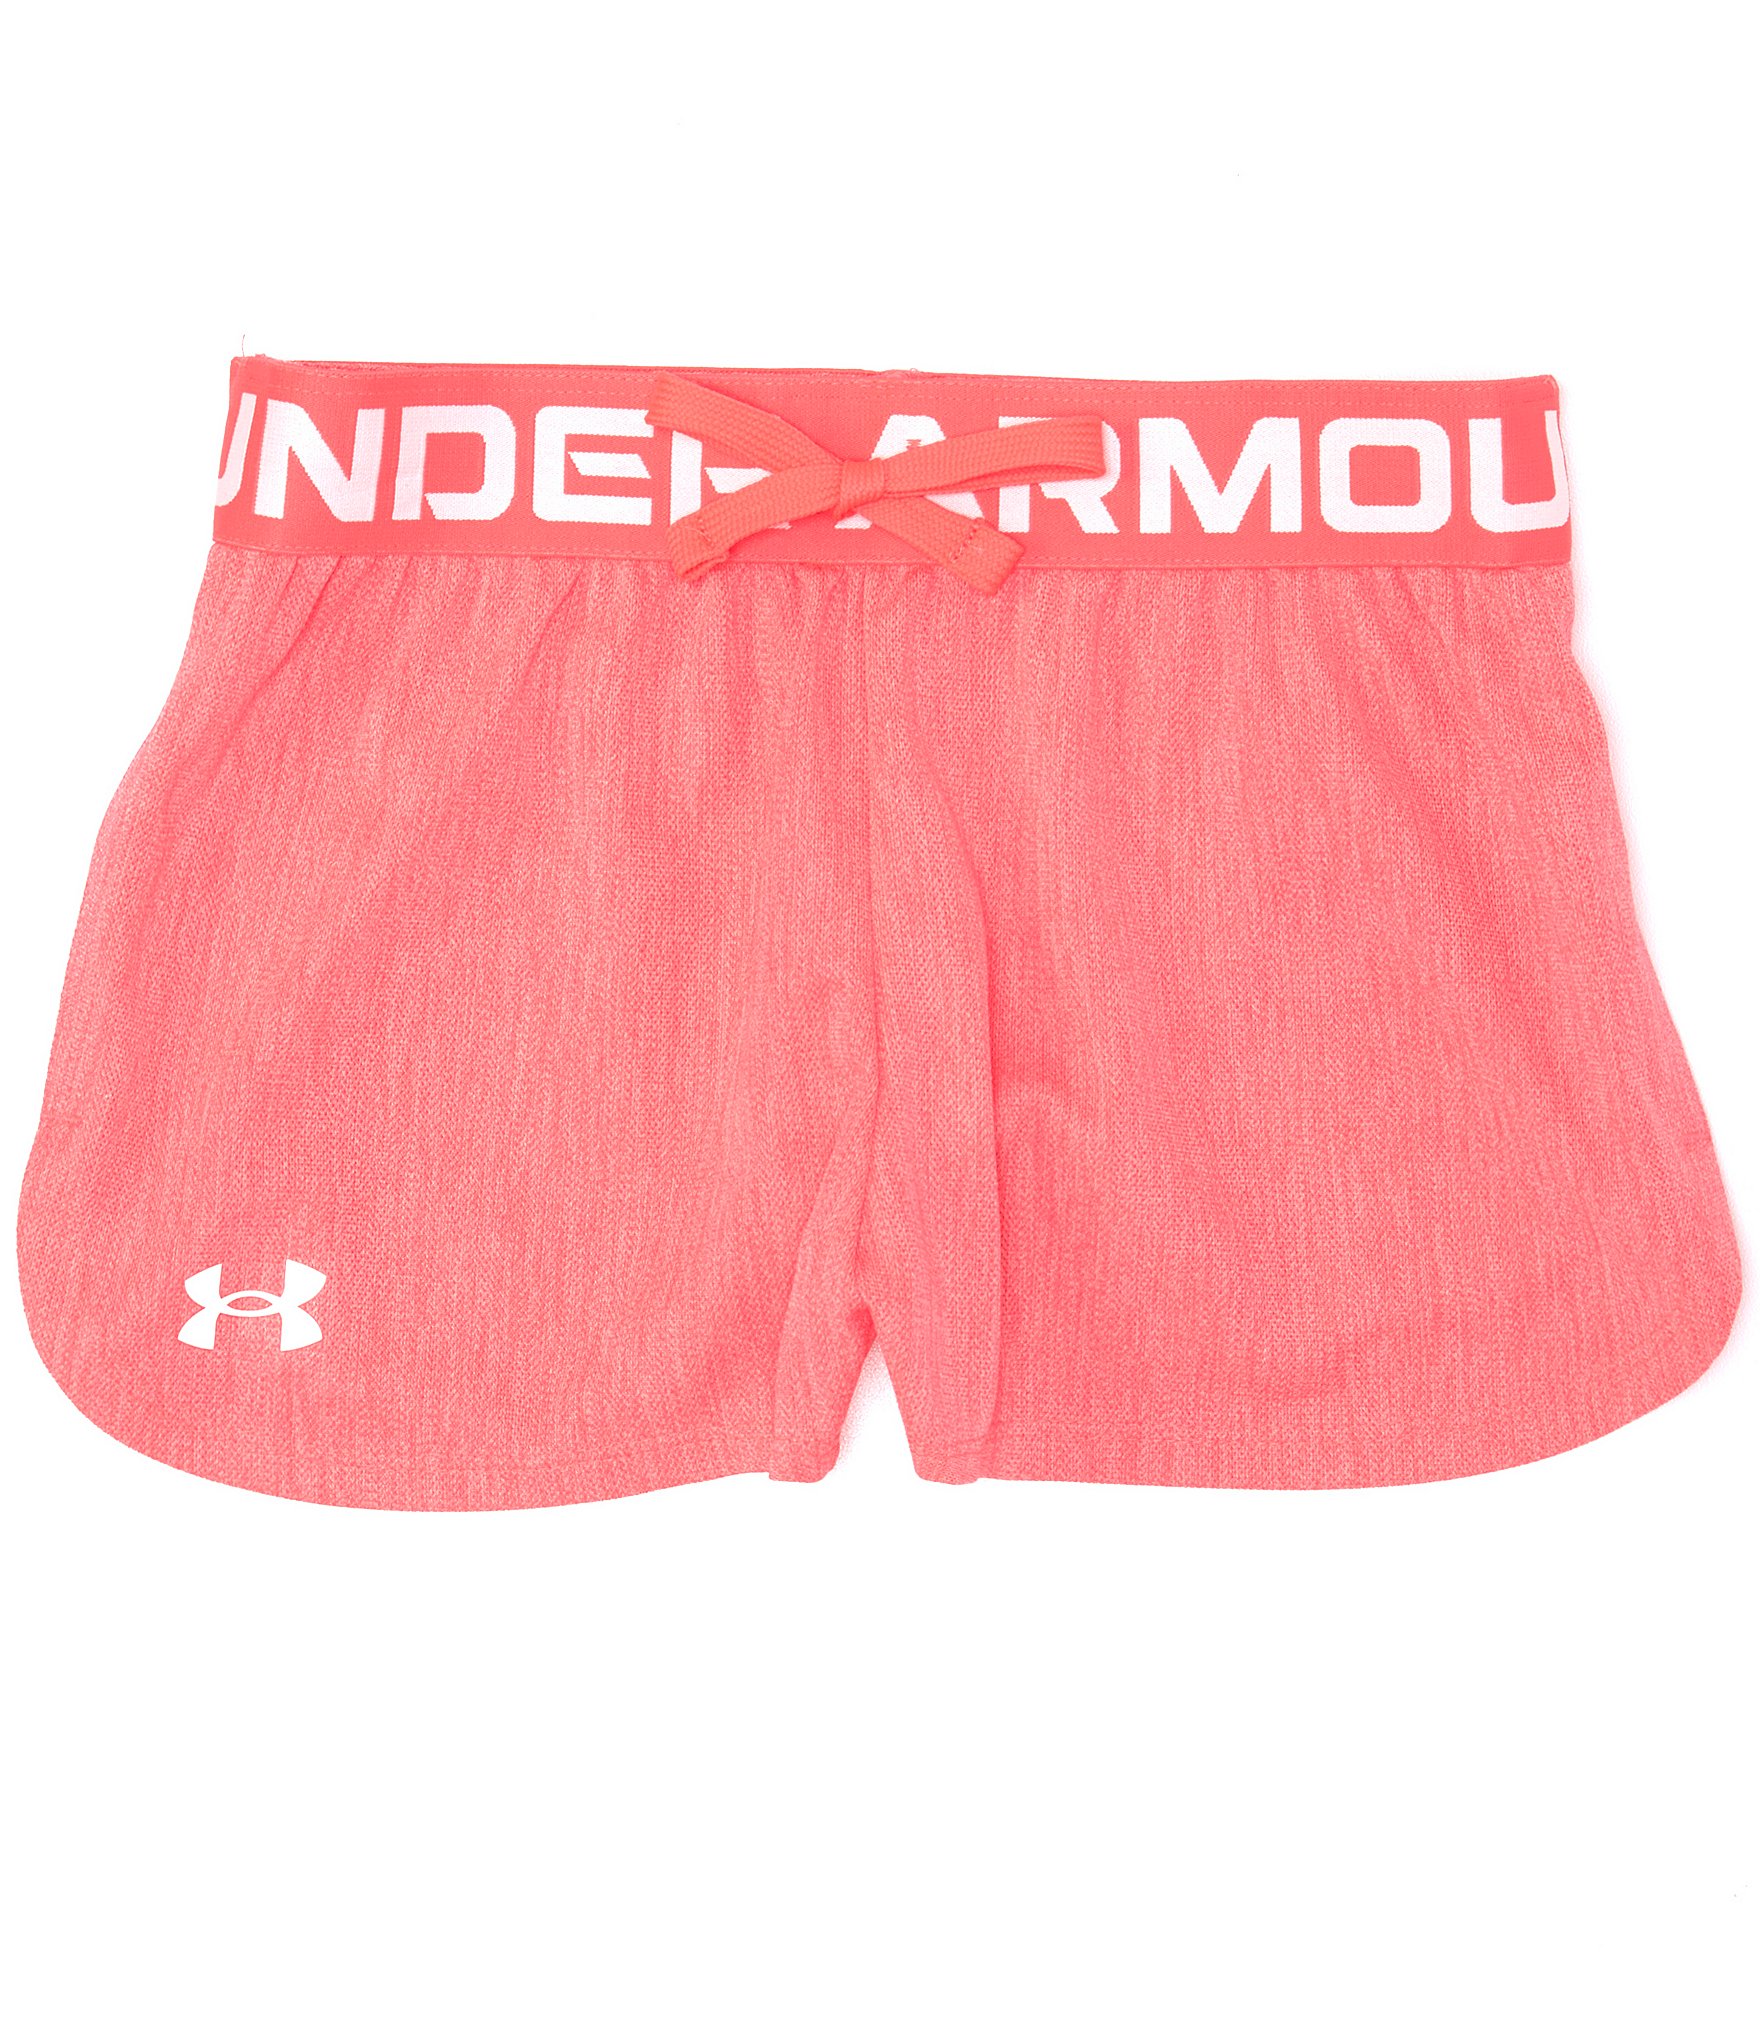 Under Armour Girls Play Up Shorts Pink XS